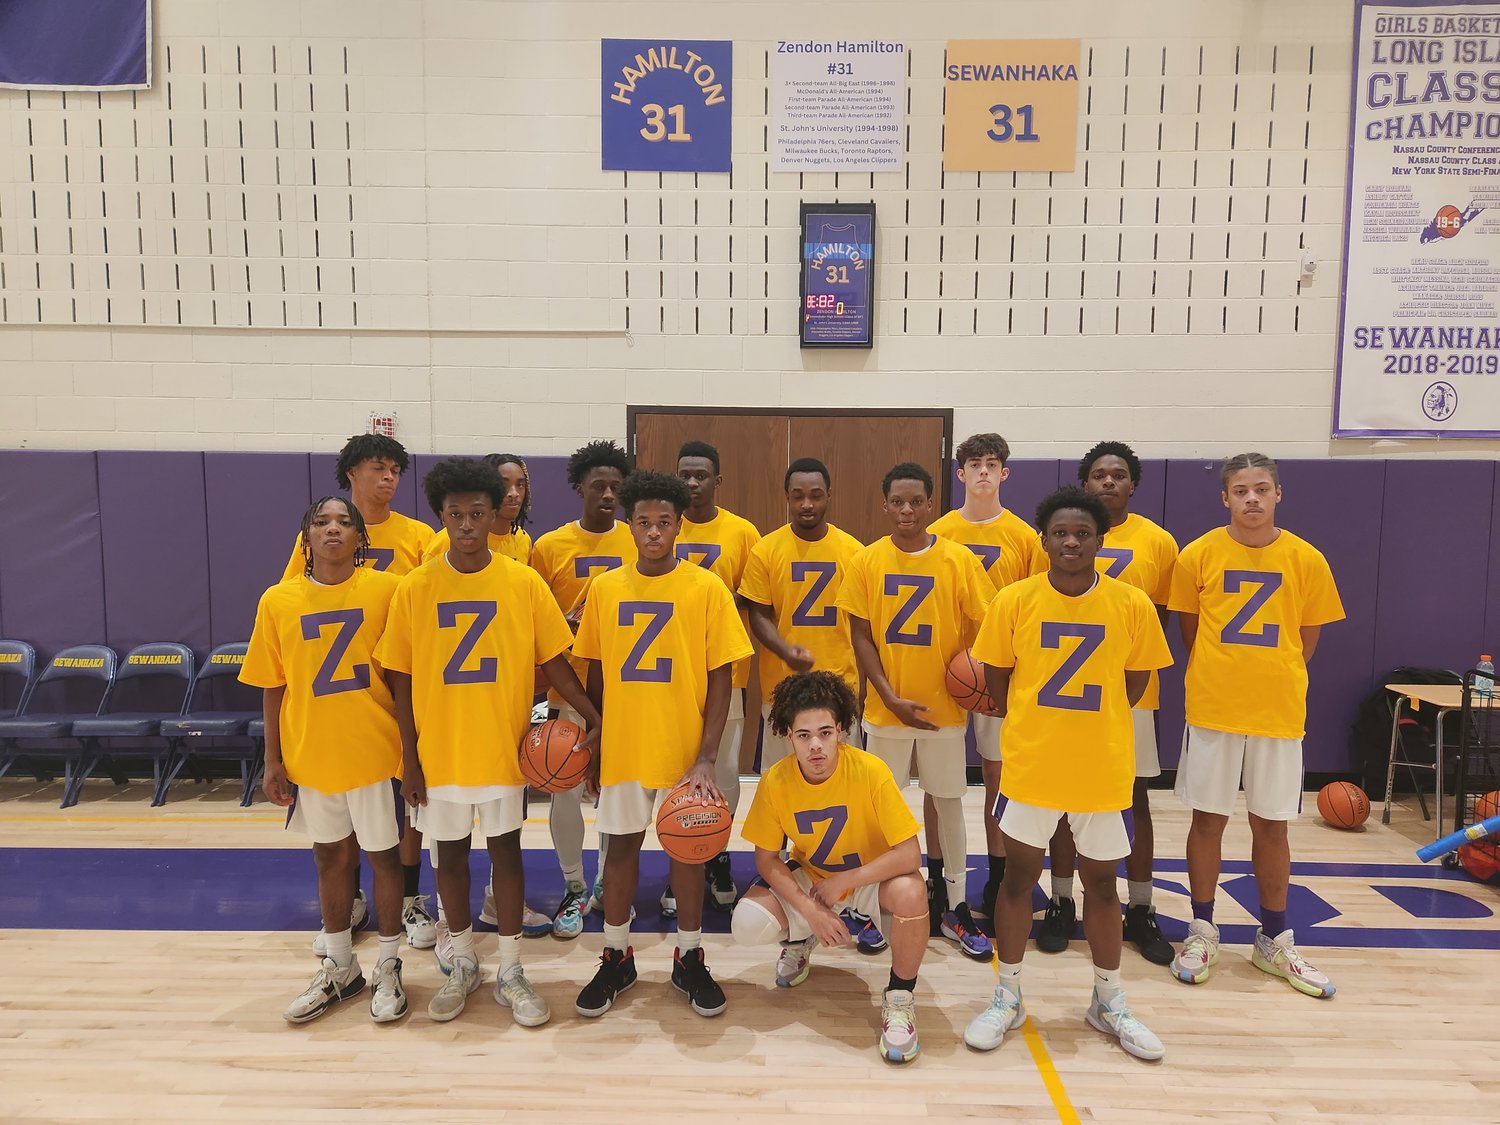 The current members of the Sewanhaka High School boys basketball team show off their uniform sporting the letter ‘Z’ — a tribute to the Sewanhaka Class of 1994 graduate and his inspiring basketball career.